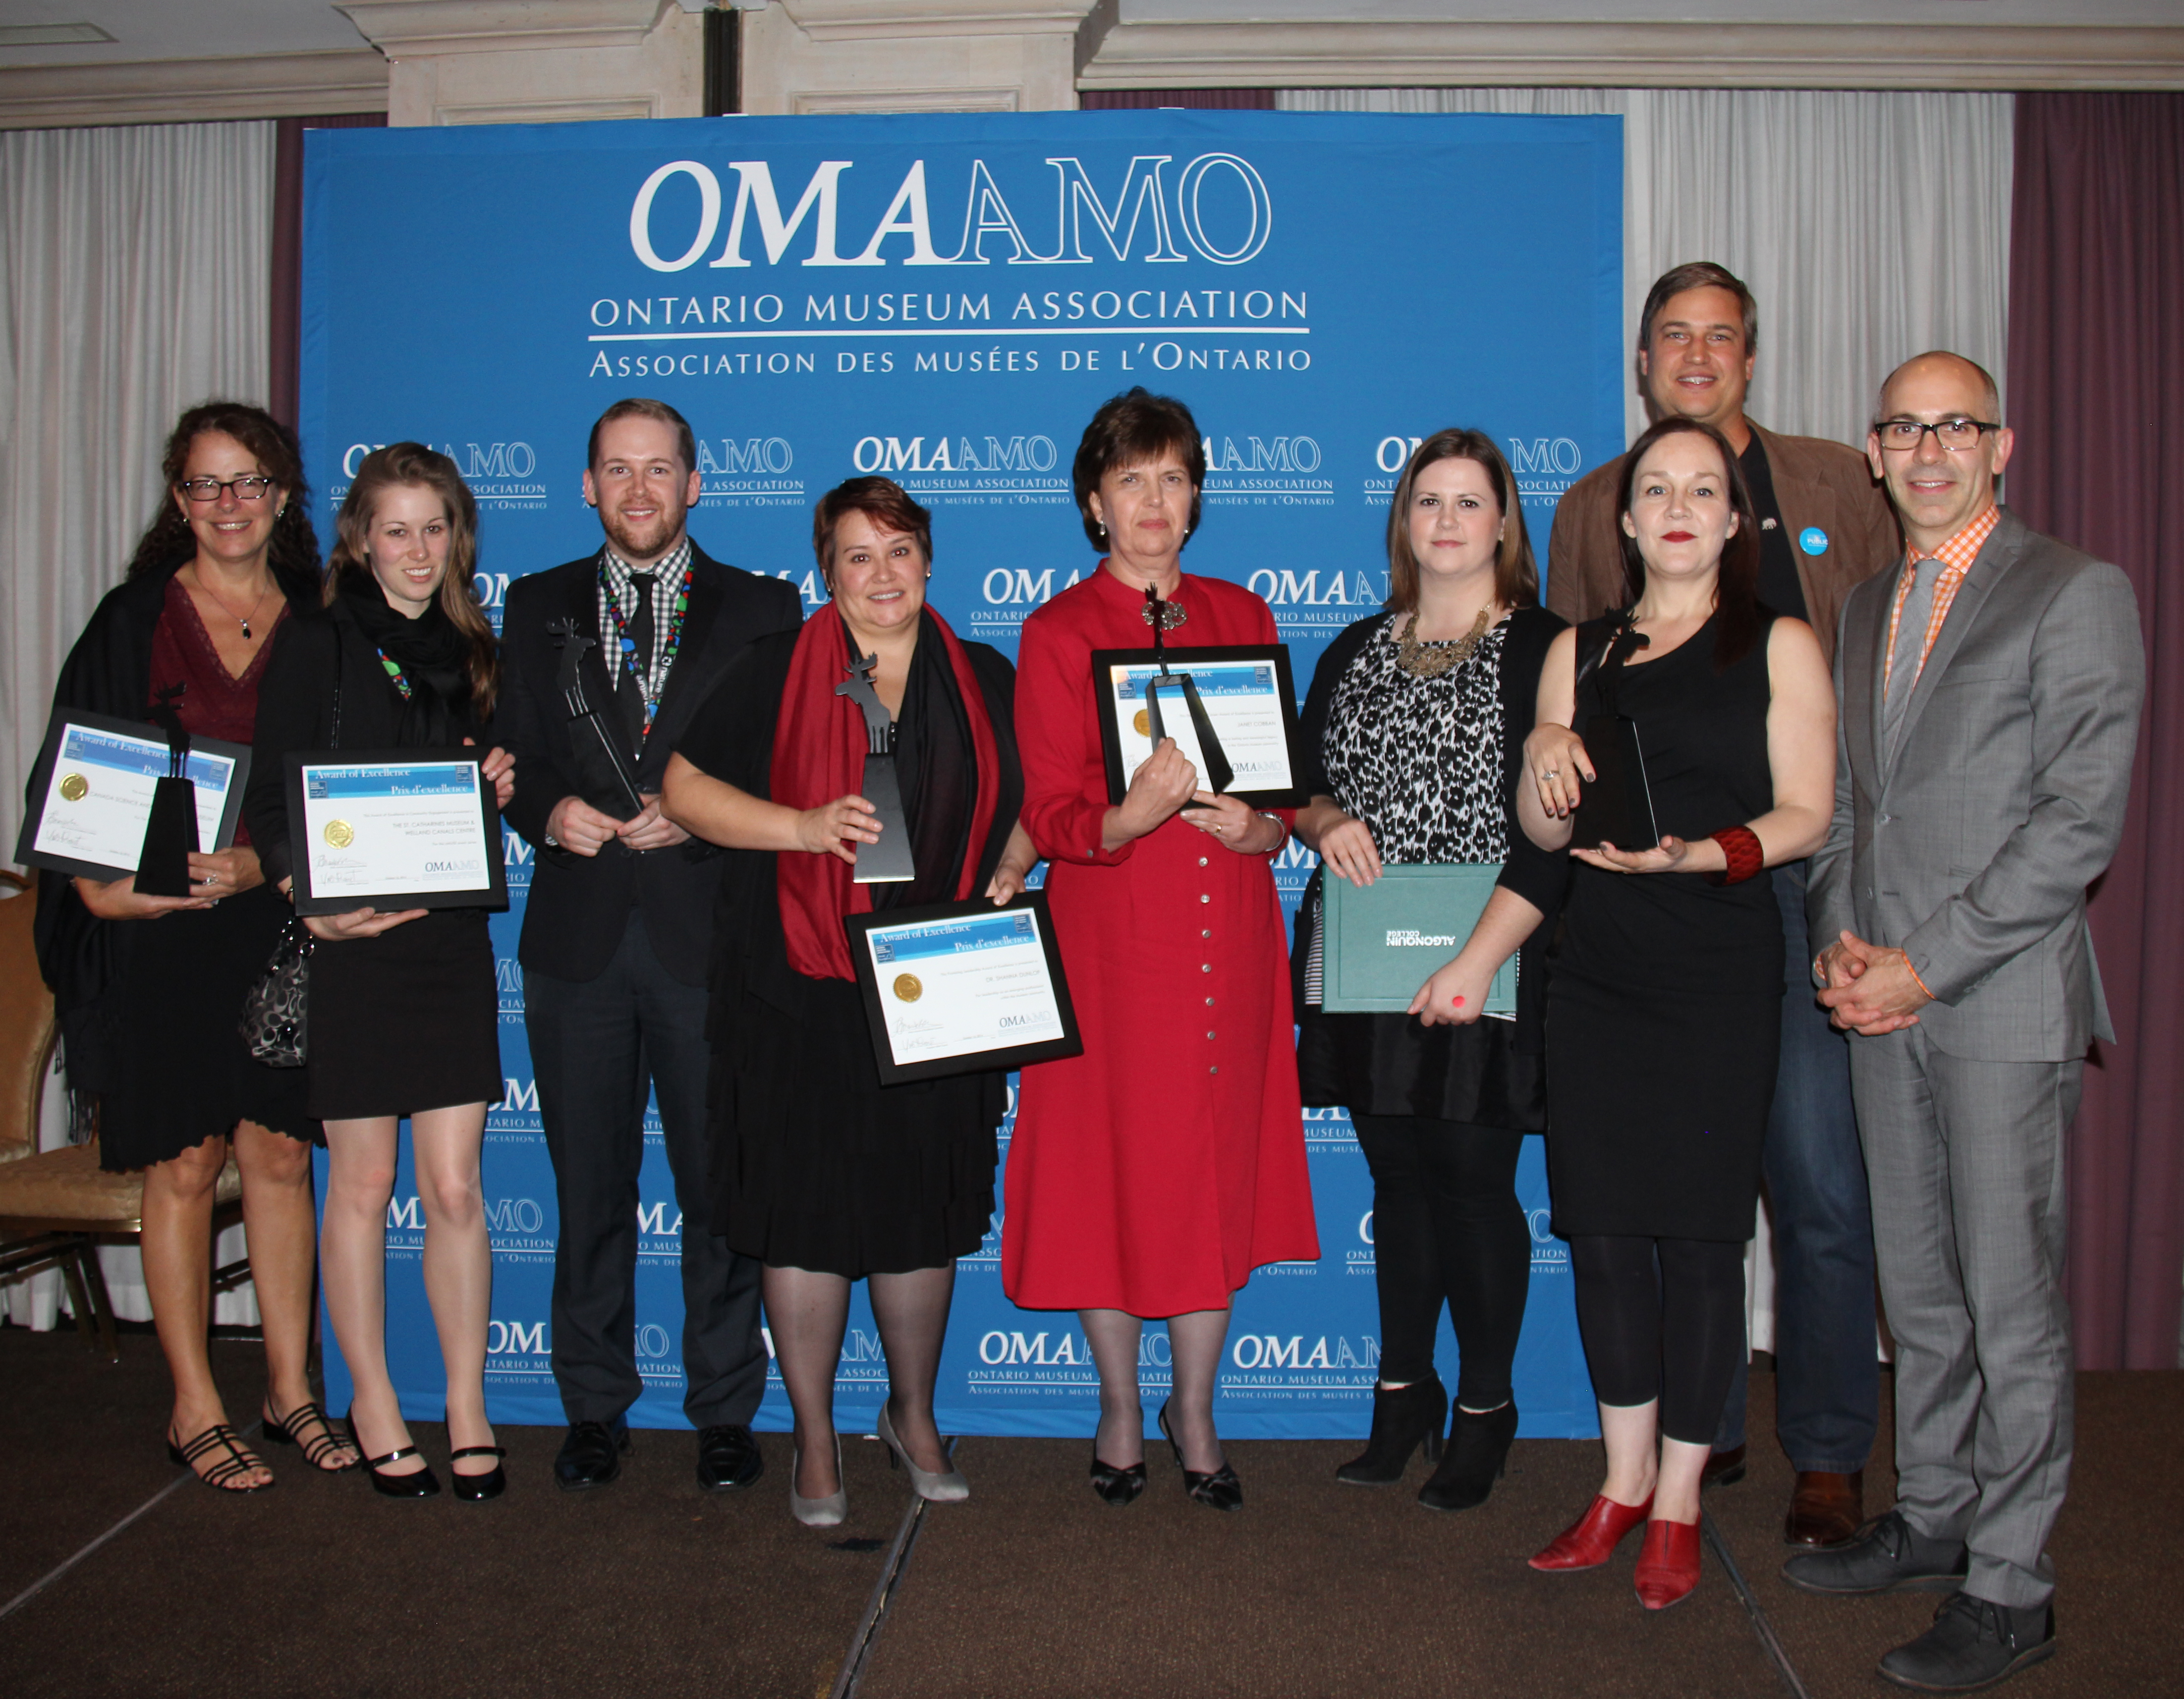 Group photo of Awards of Excellence recipients in front of OMA banner